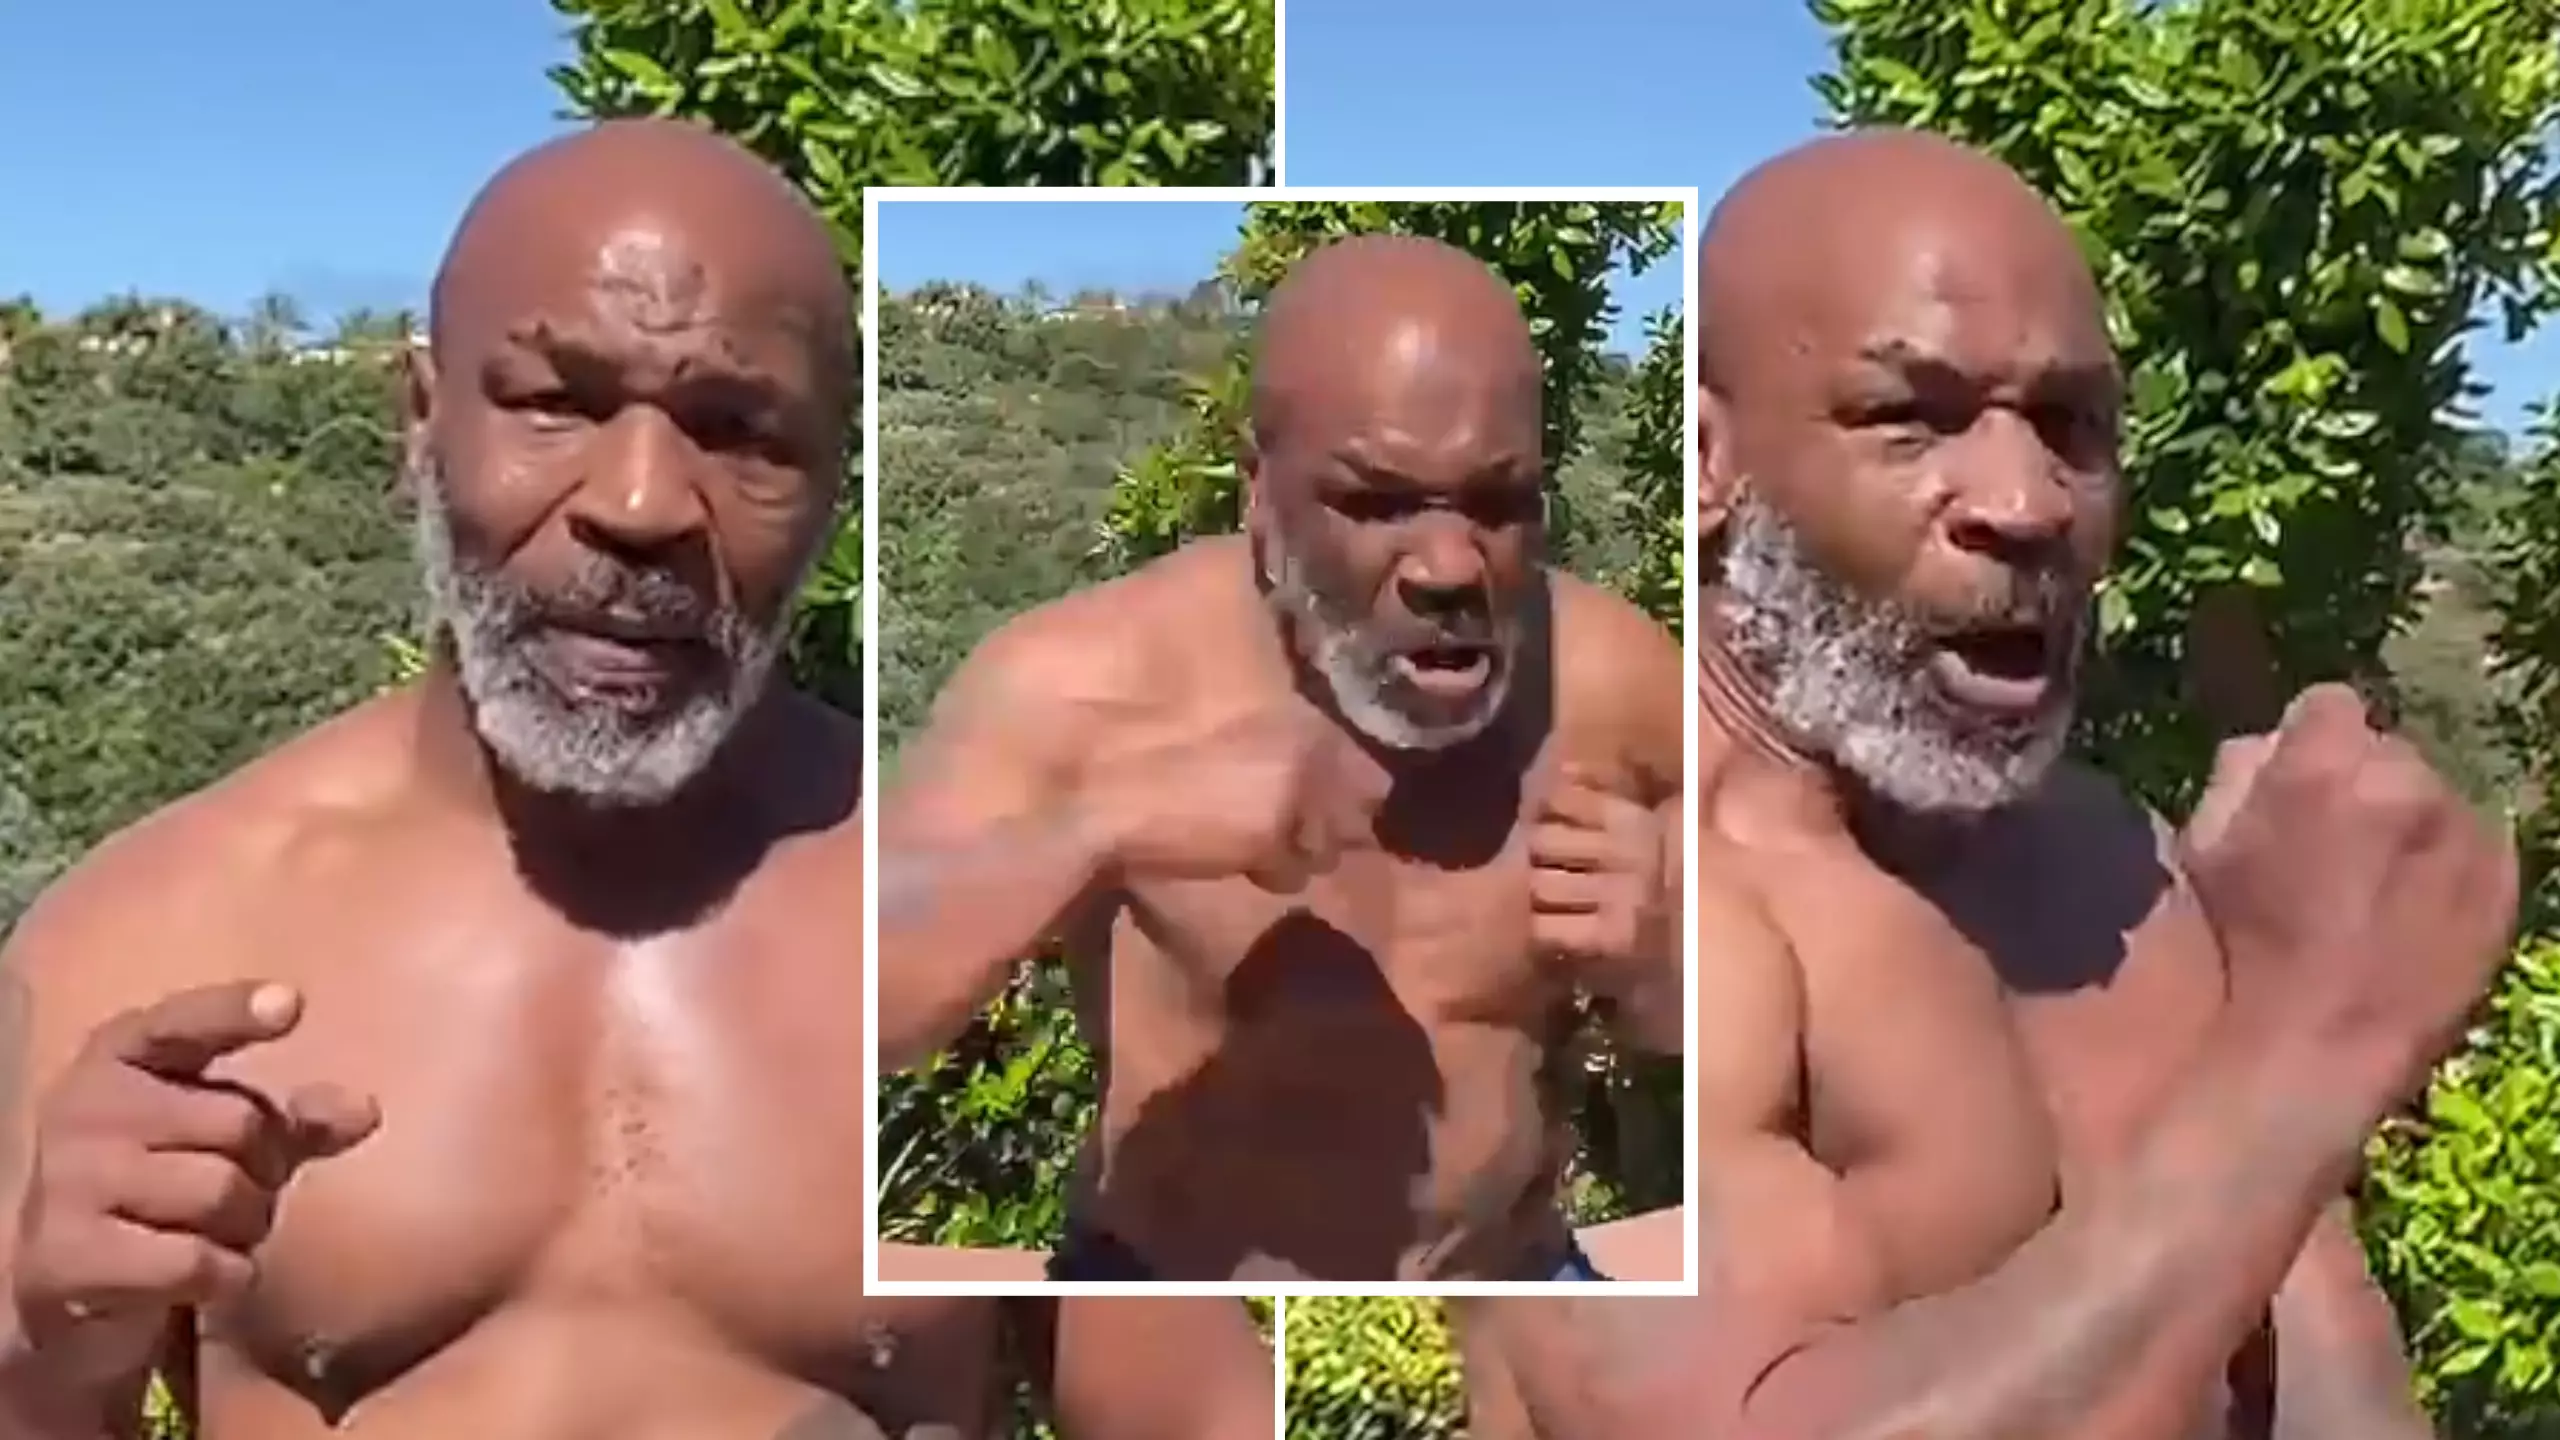 First Images Of A Topless Mike Tyson Emerge And He Looks In Unbelievable Shape, Aged 53